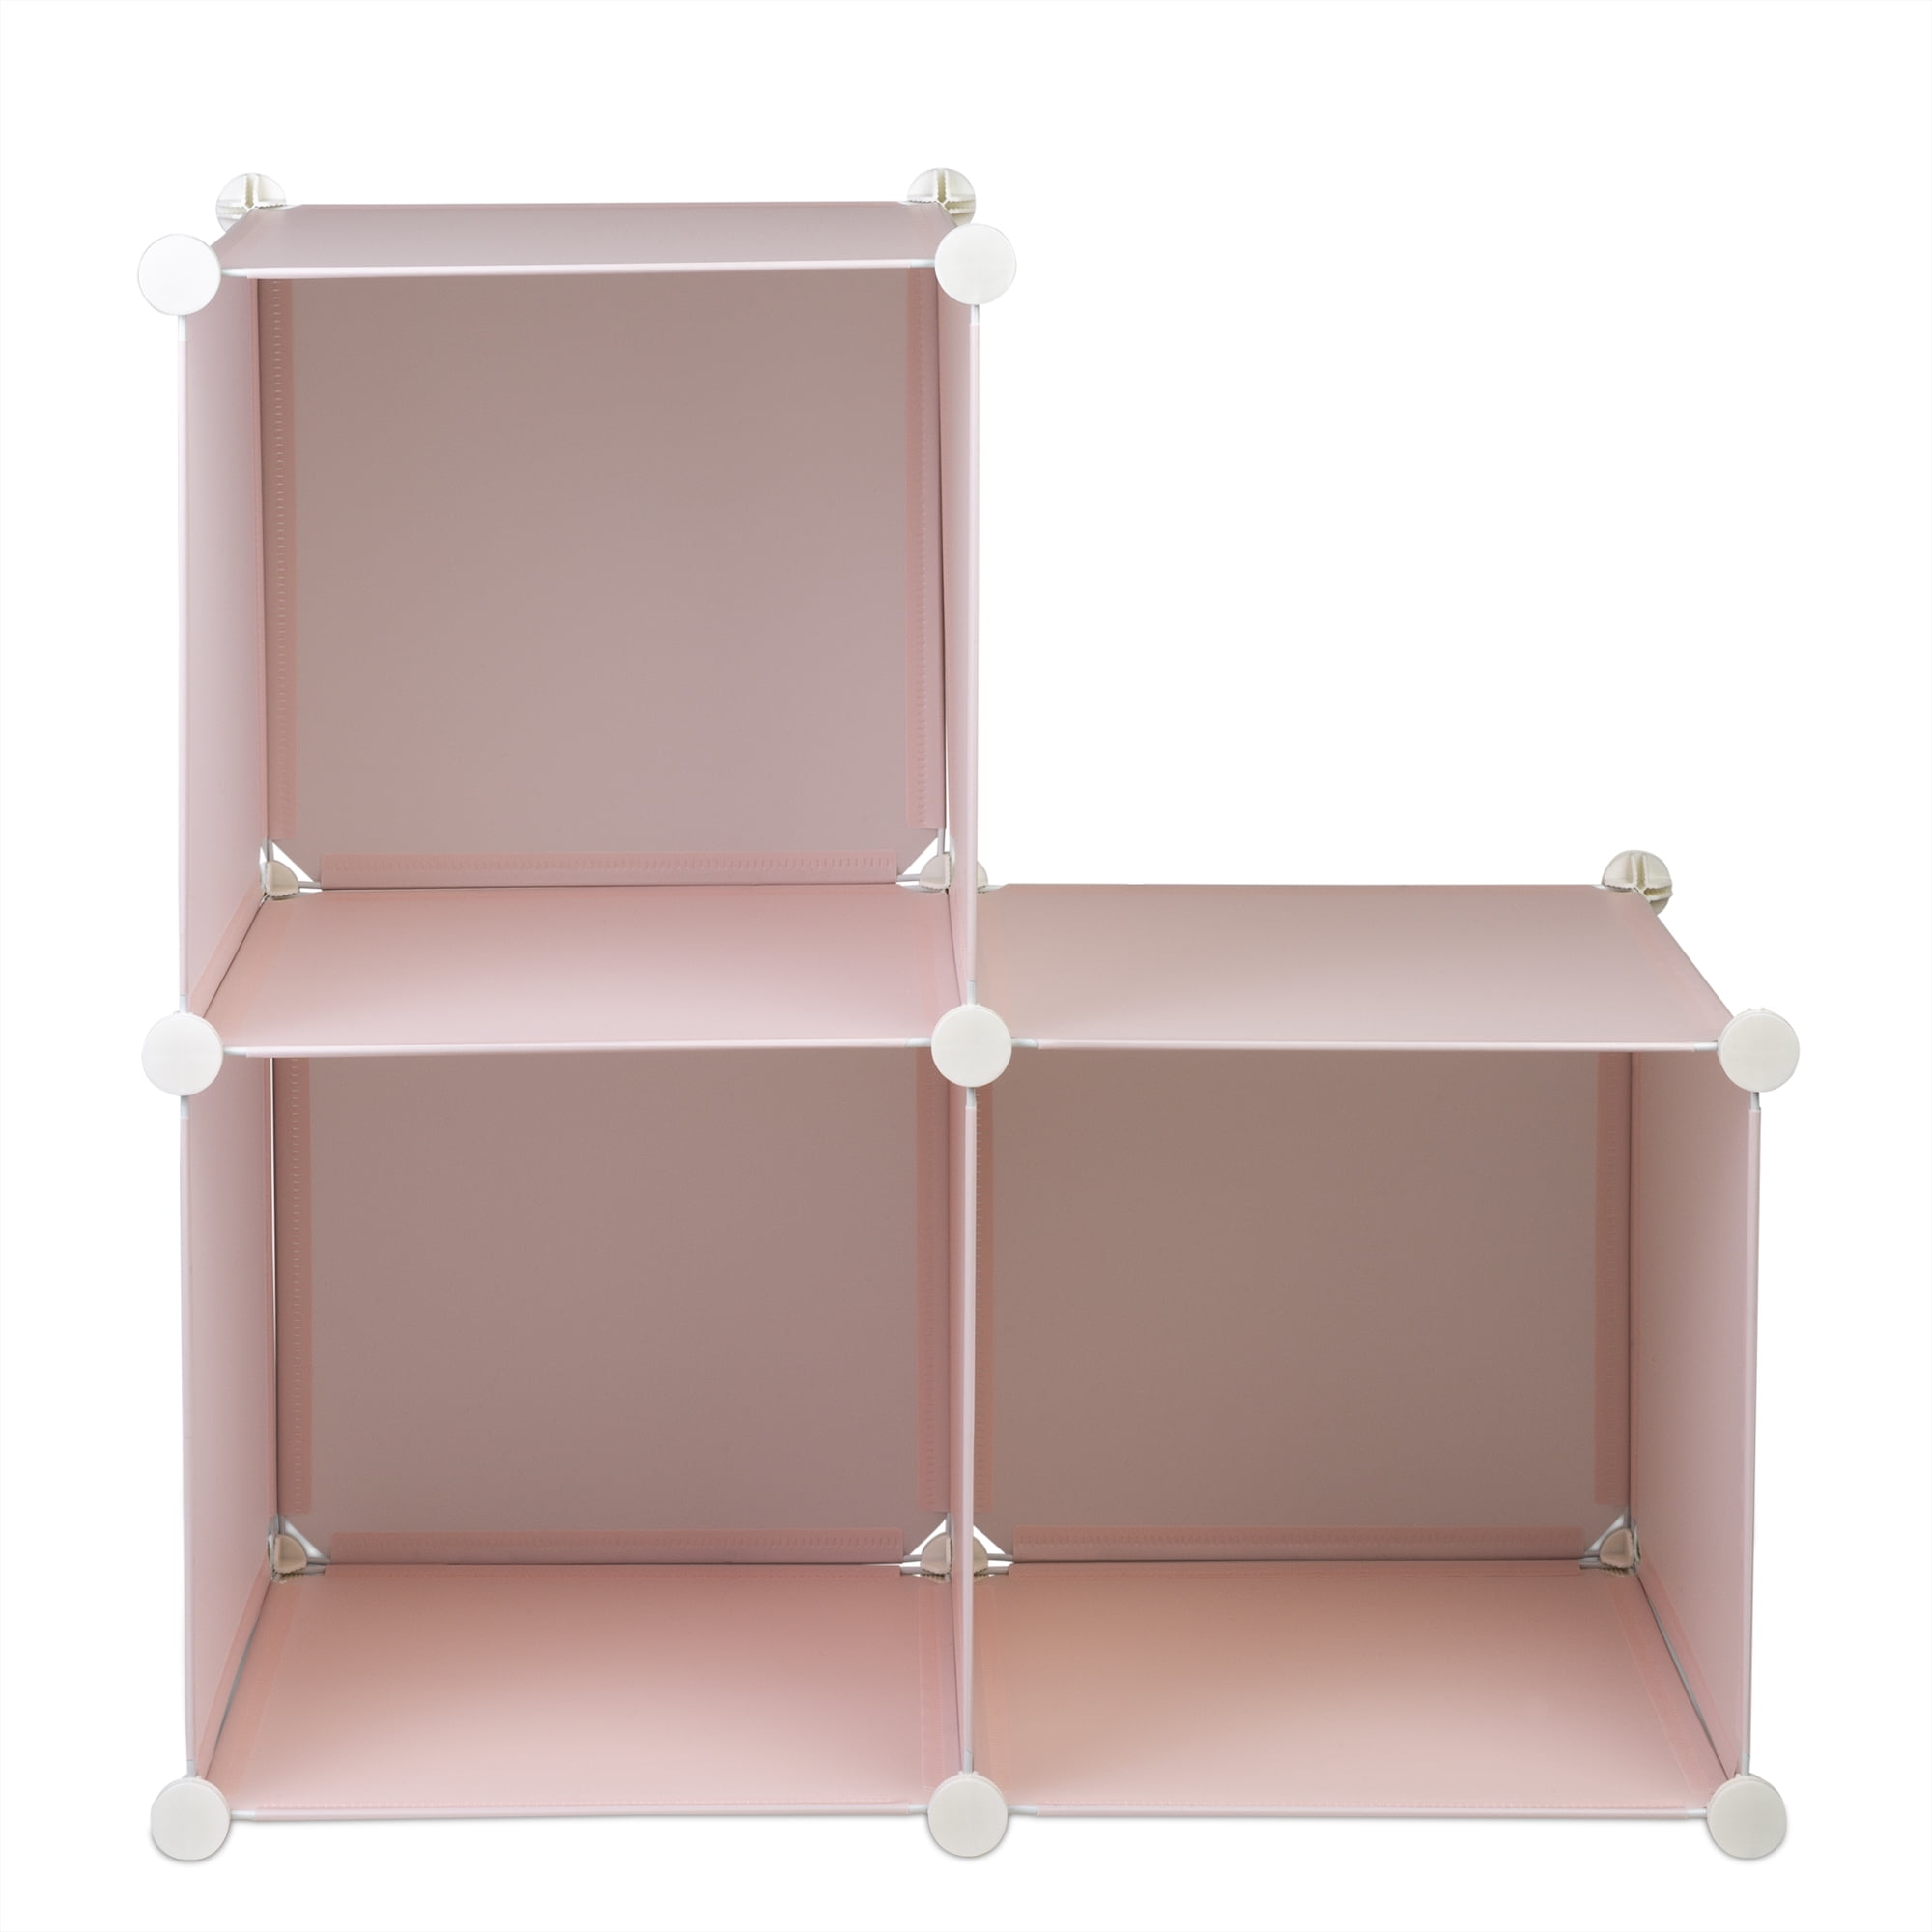 Yourzone Closet 3 cube organizer Pink Reviews